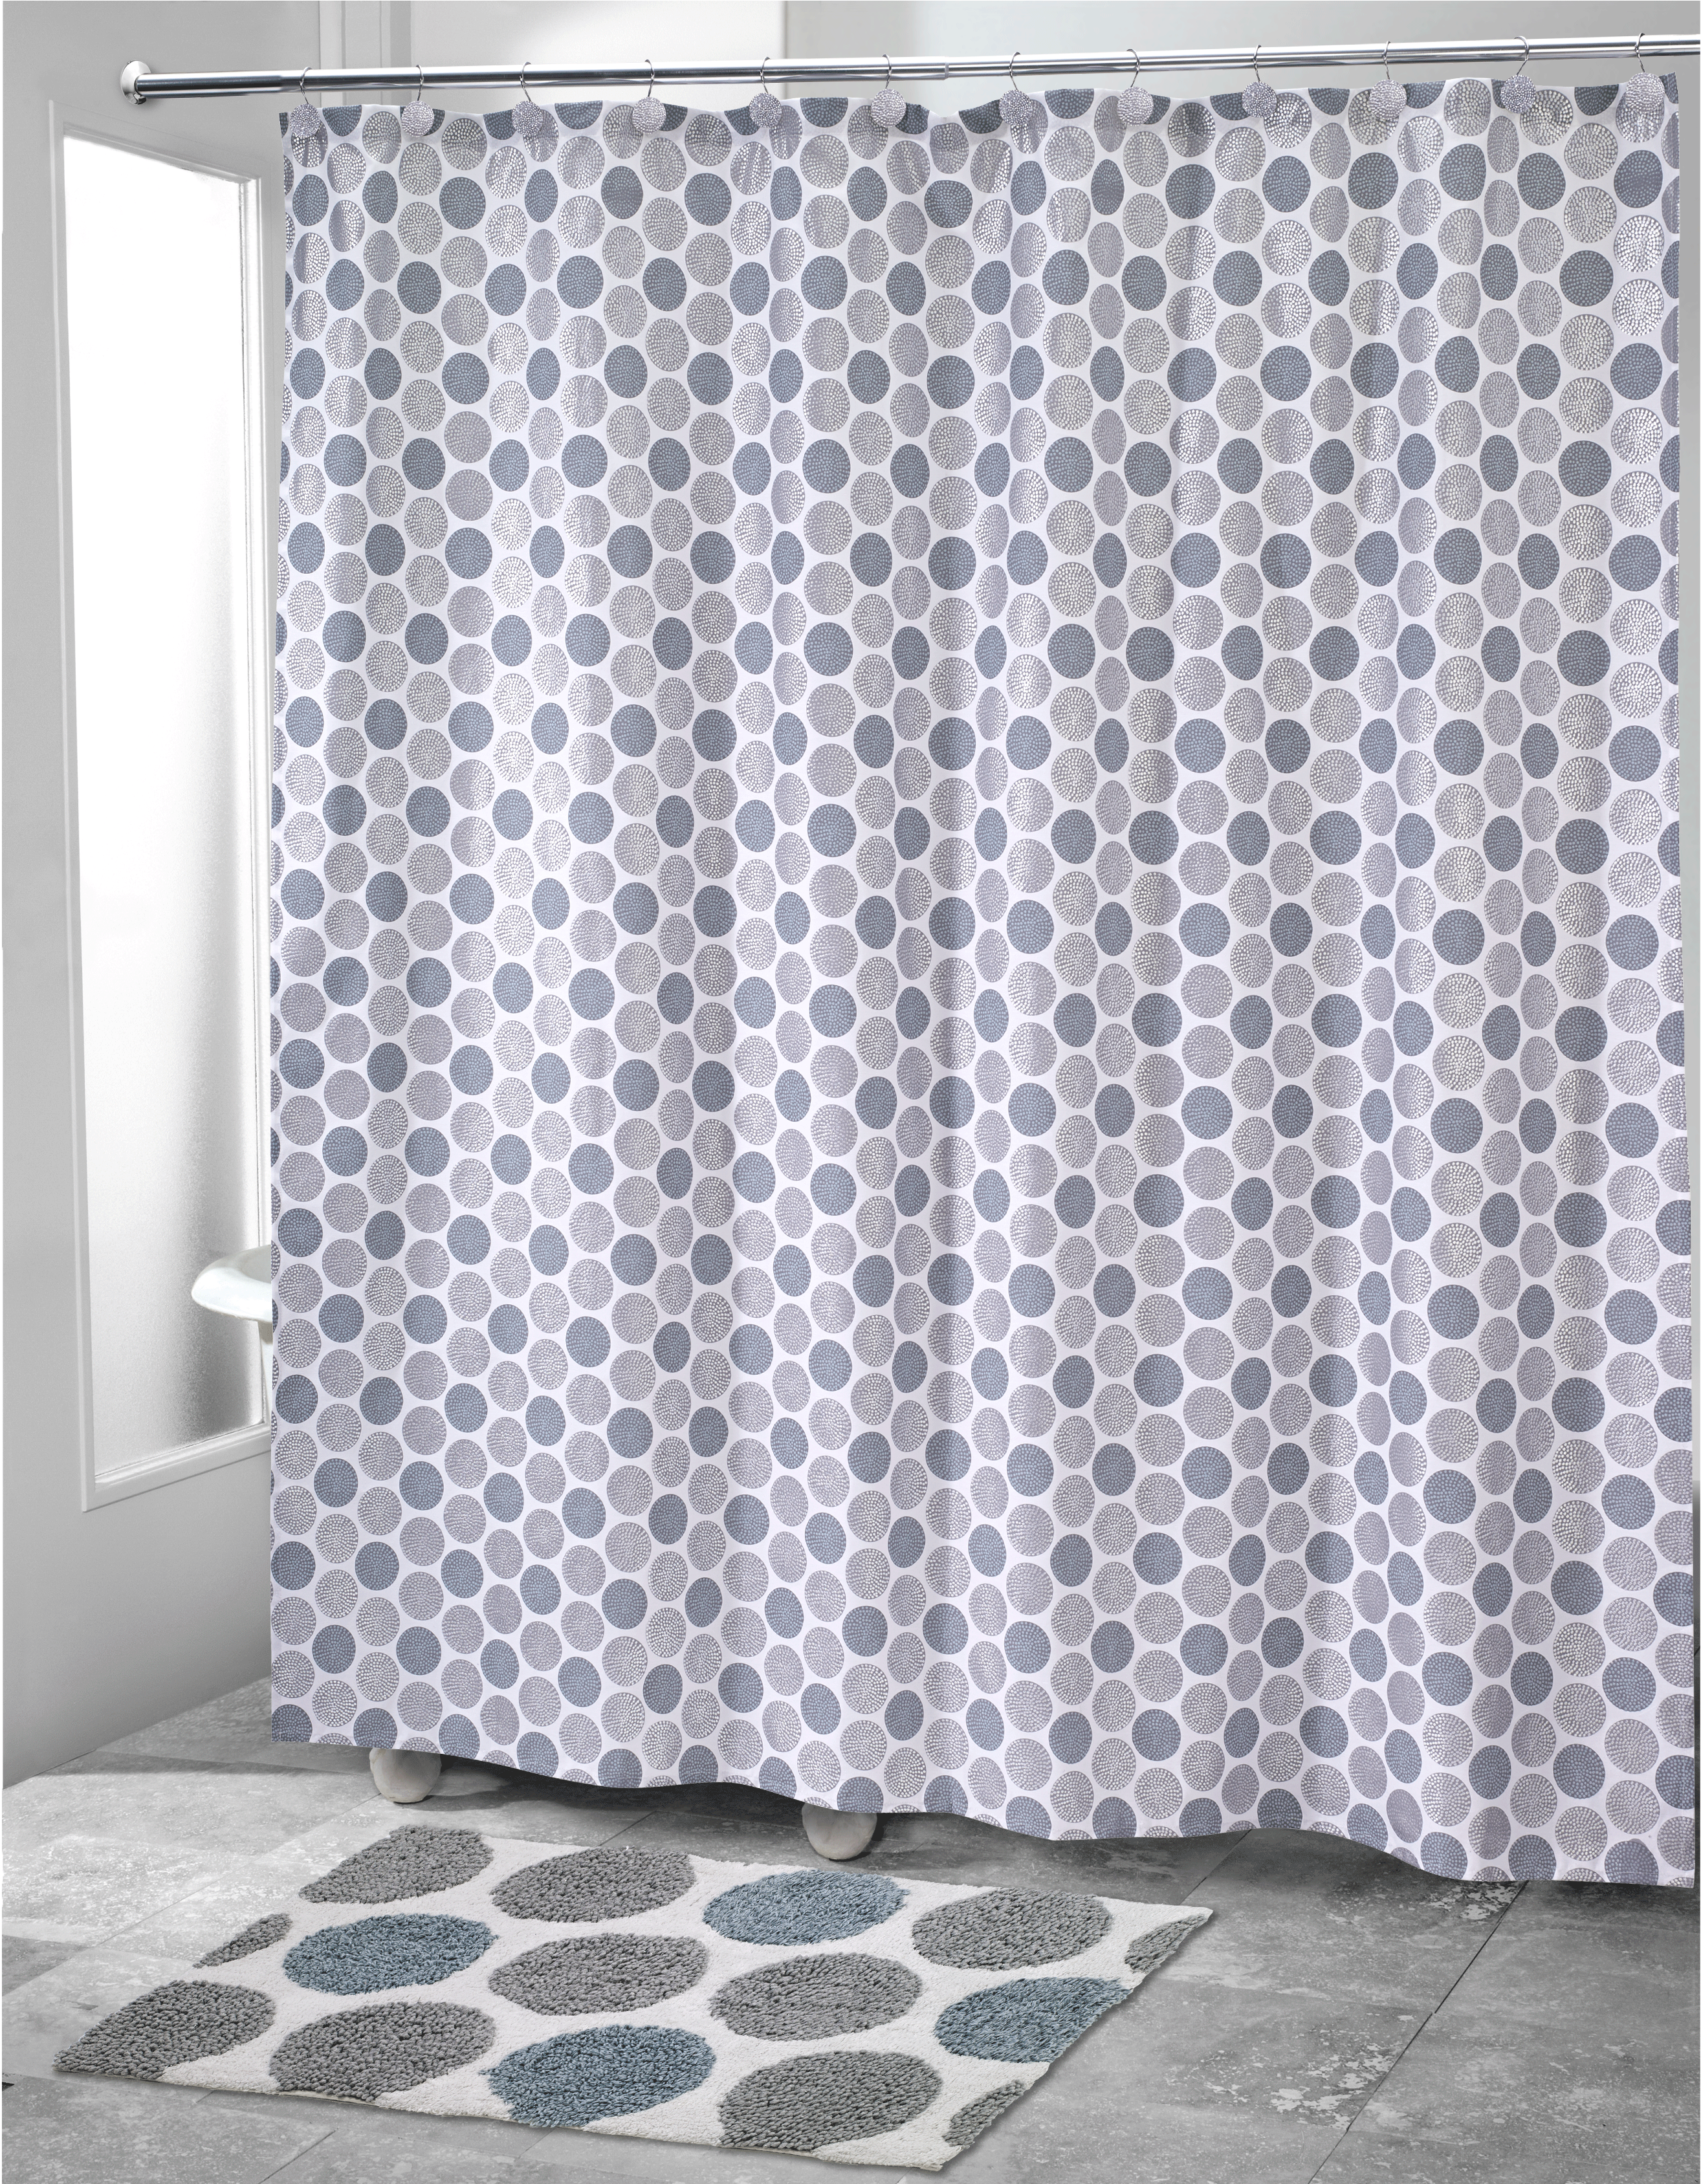 Dotted Circles Shower Curtain Collection - Avanti Dotted Circle Shower Curtain - Shower Curtain (3375x3375), Png Download